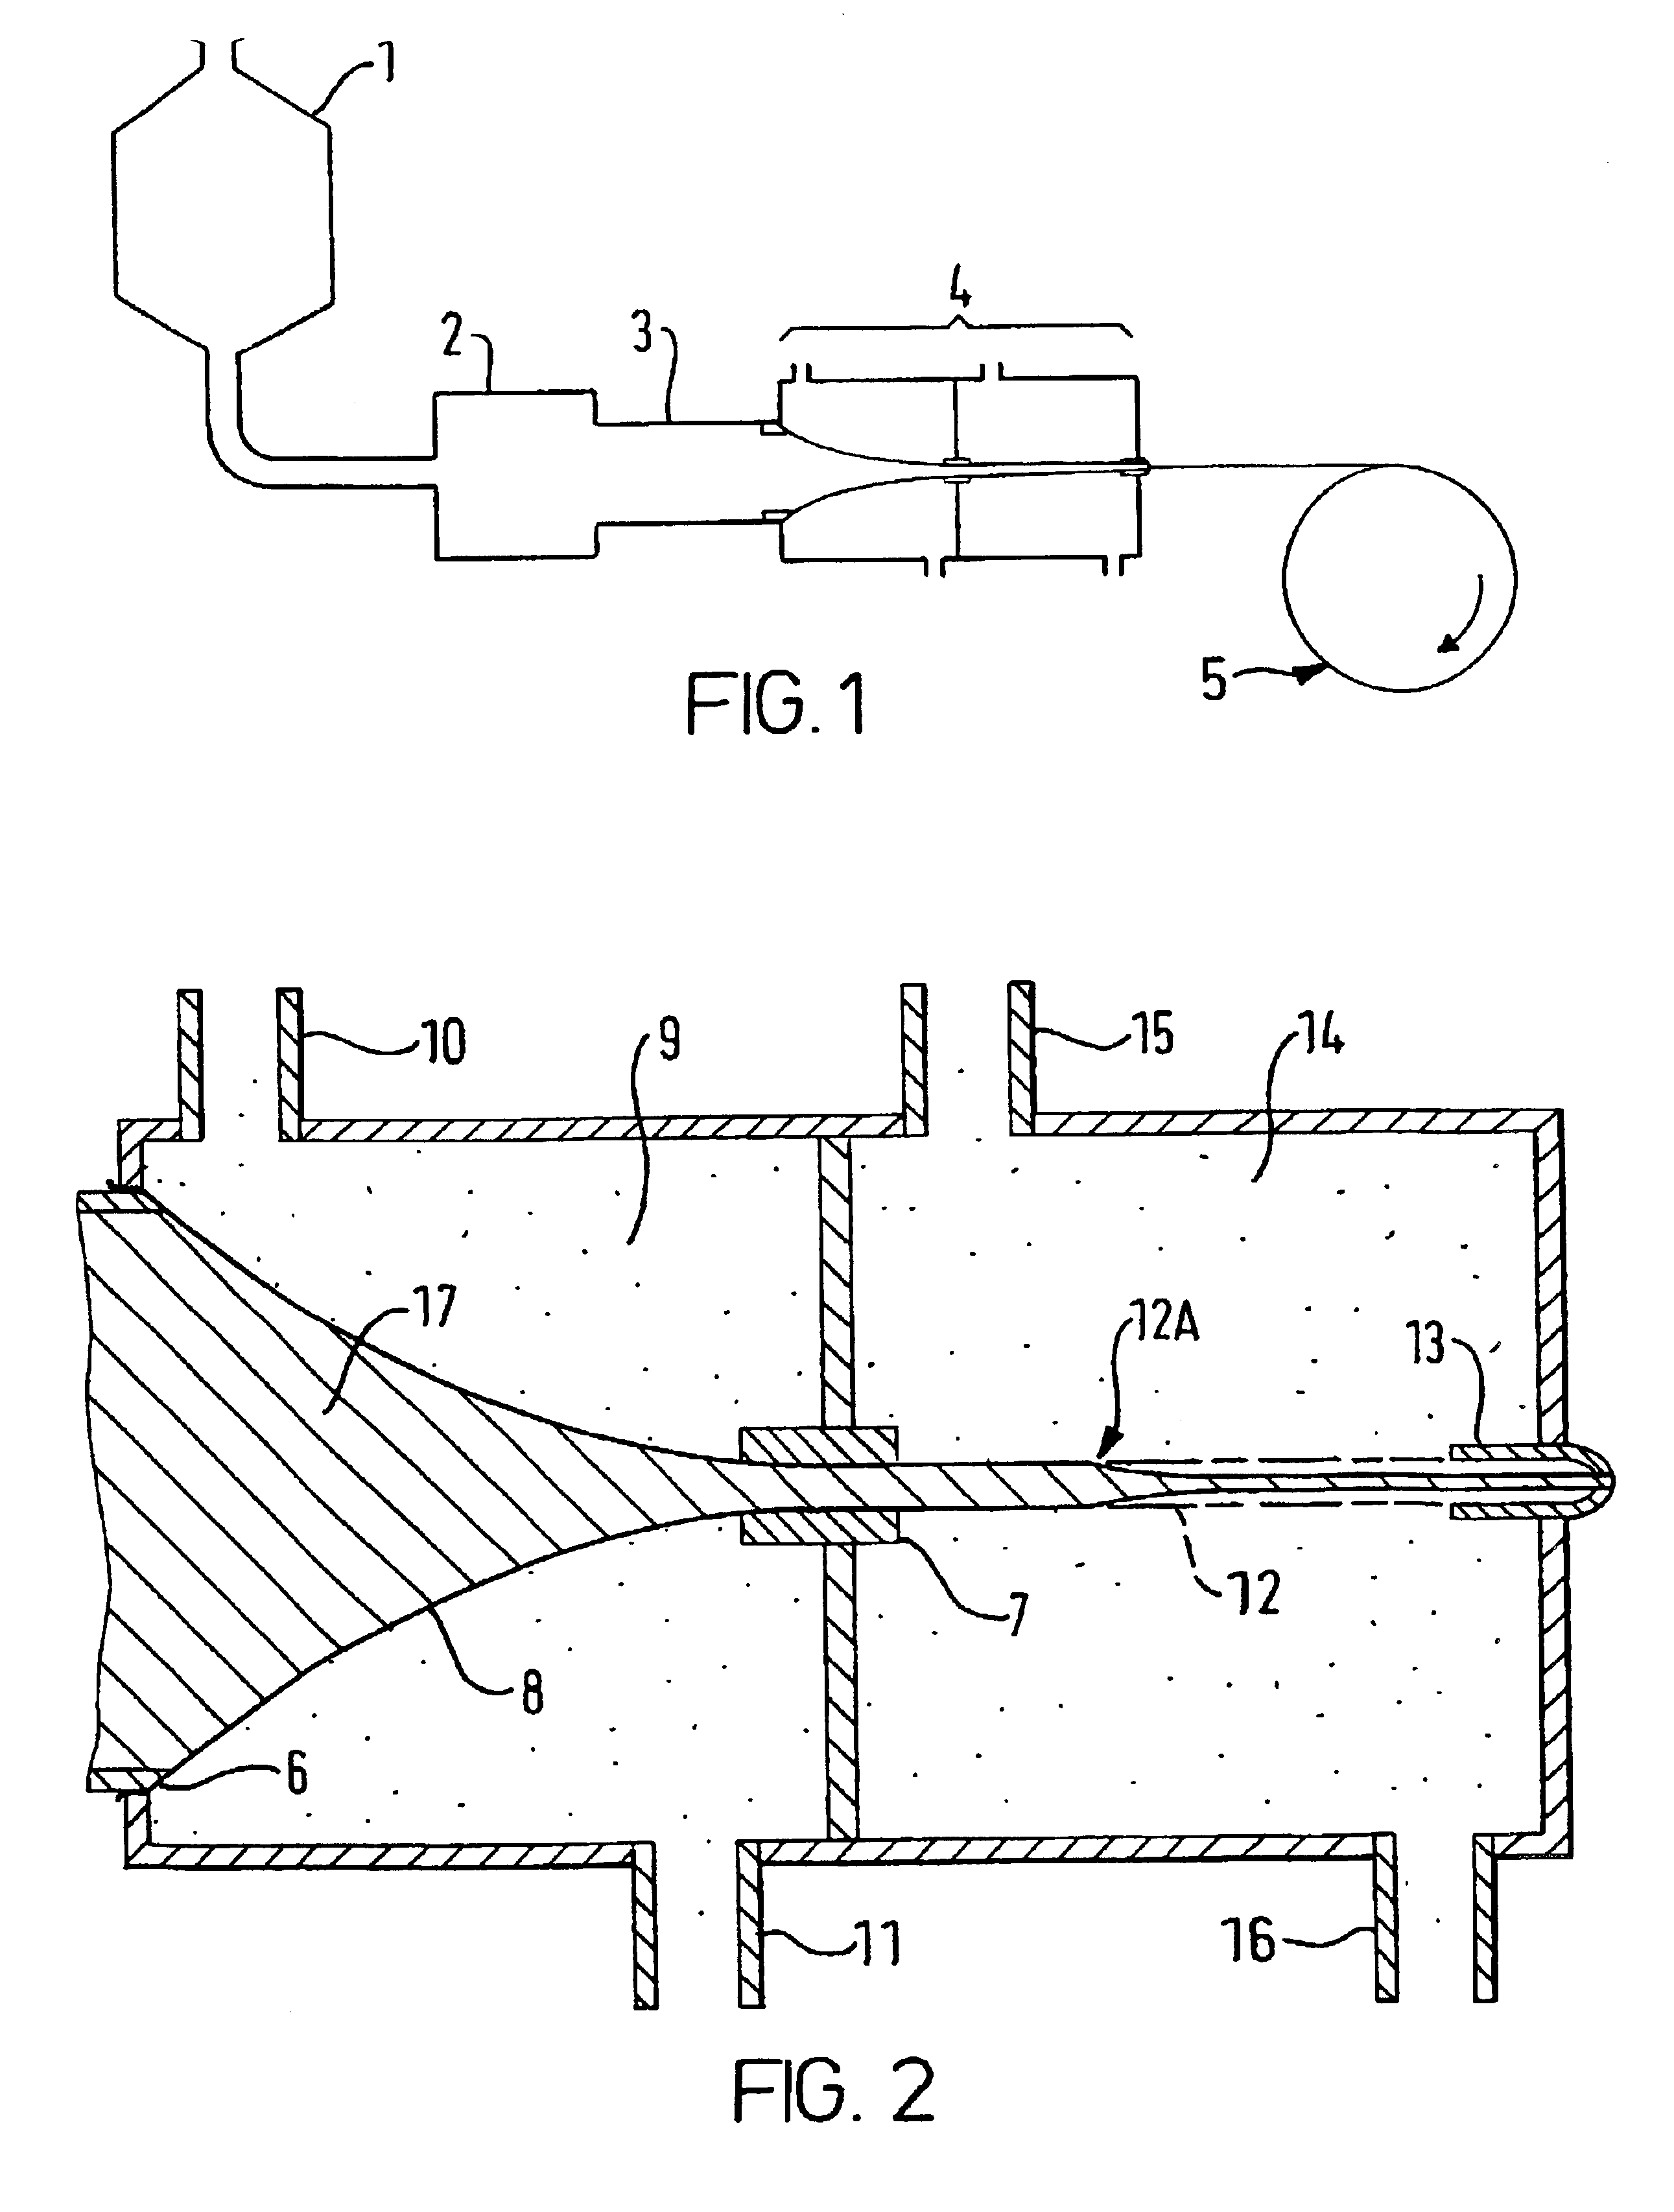 Apparatus and method for forming materials